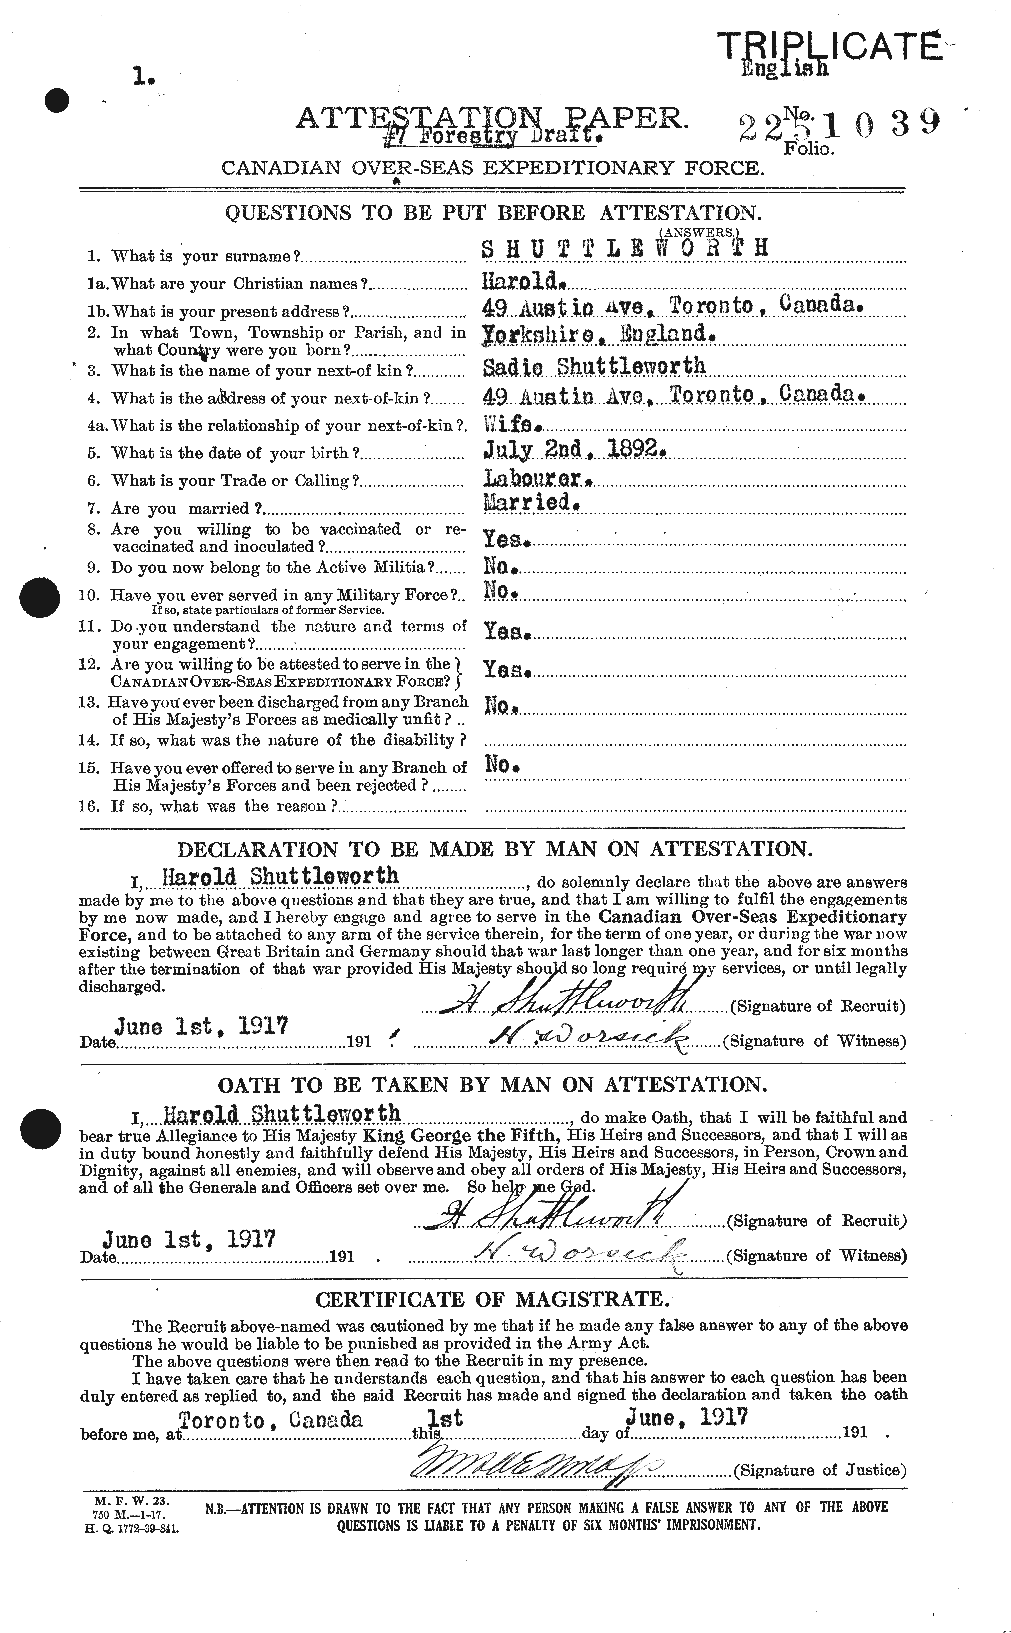 Personnel Records of the First World War - CEF 096821a